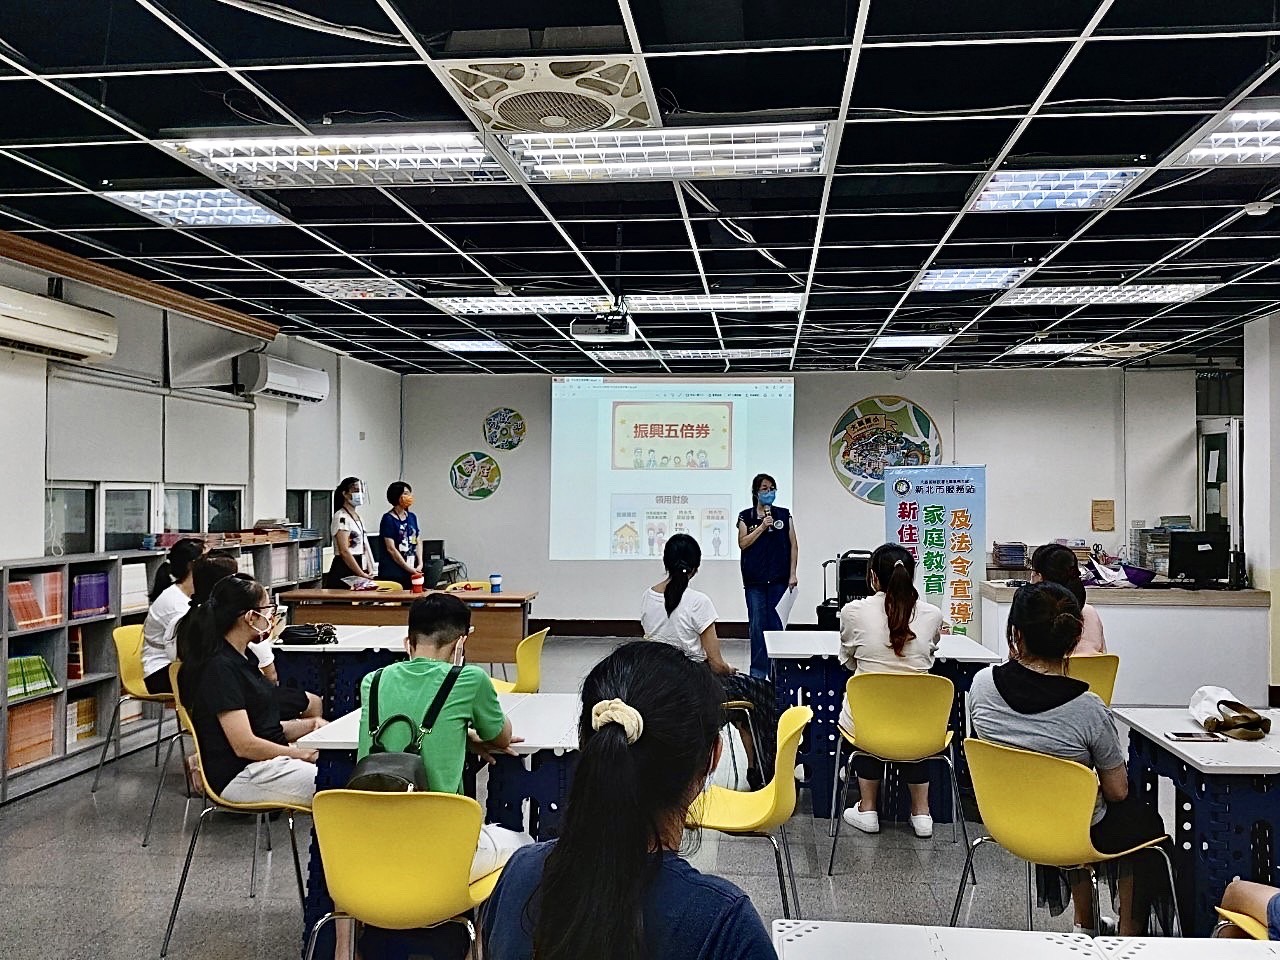 The New Taipei City Service Station of the NIA explained to the trainees who may receive the quintuple stimulus vouchers, how to receive it, and related precautions. (Photo/Provided by New Taipei City Service Station)